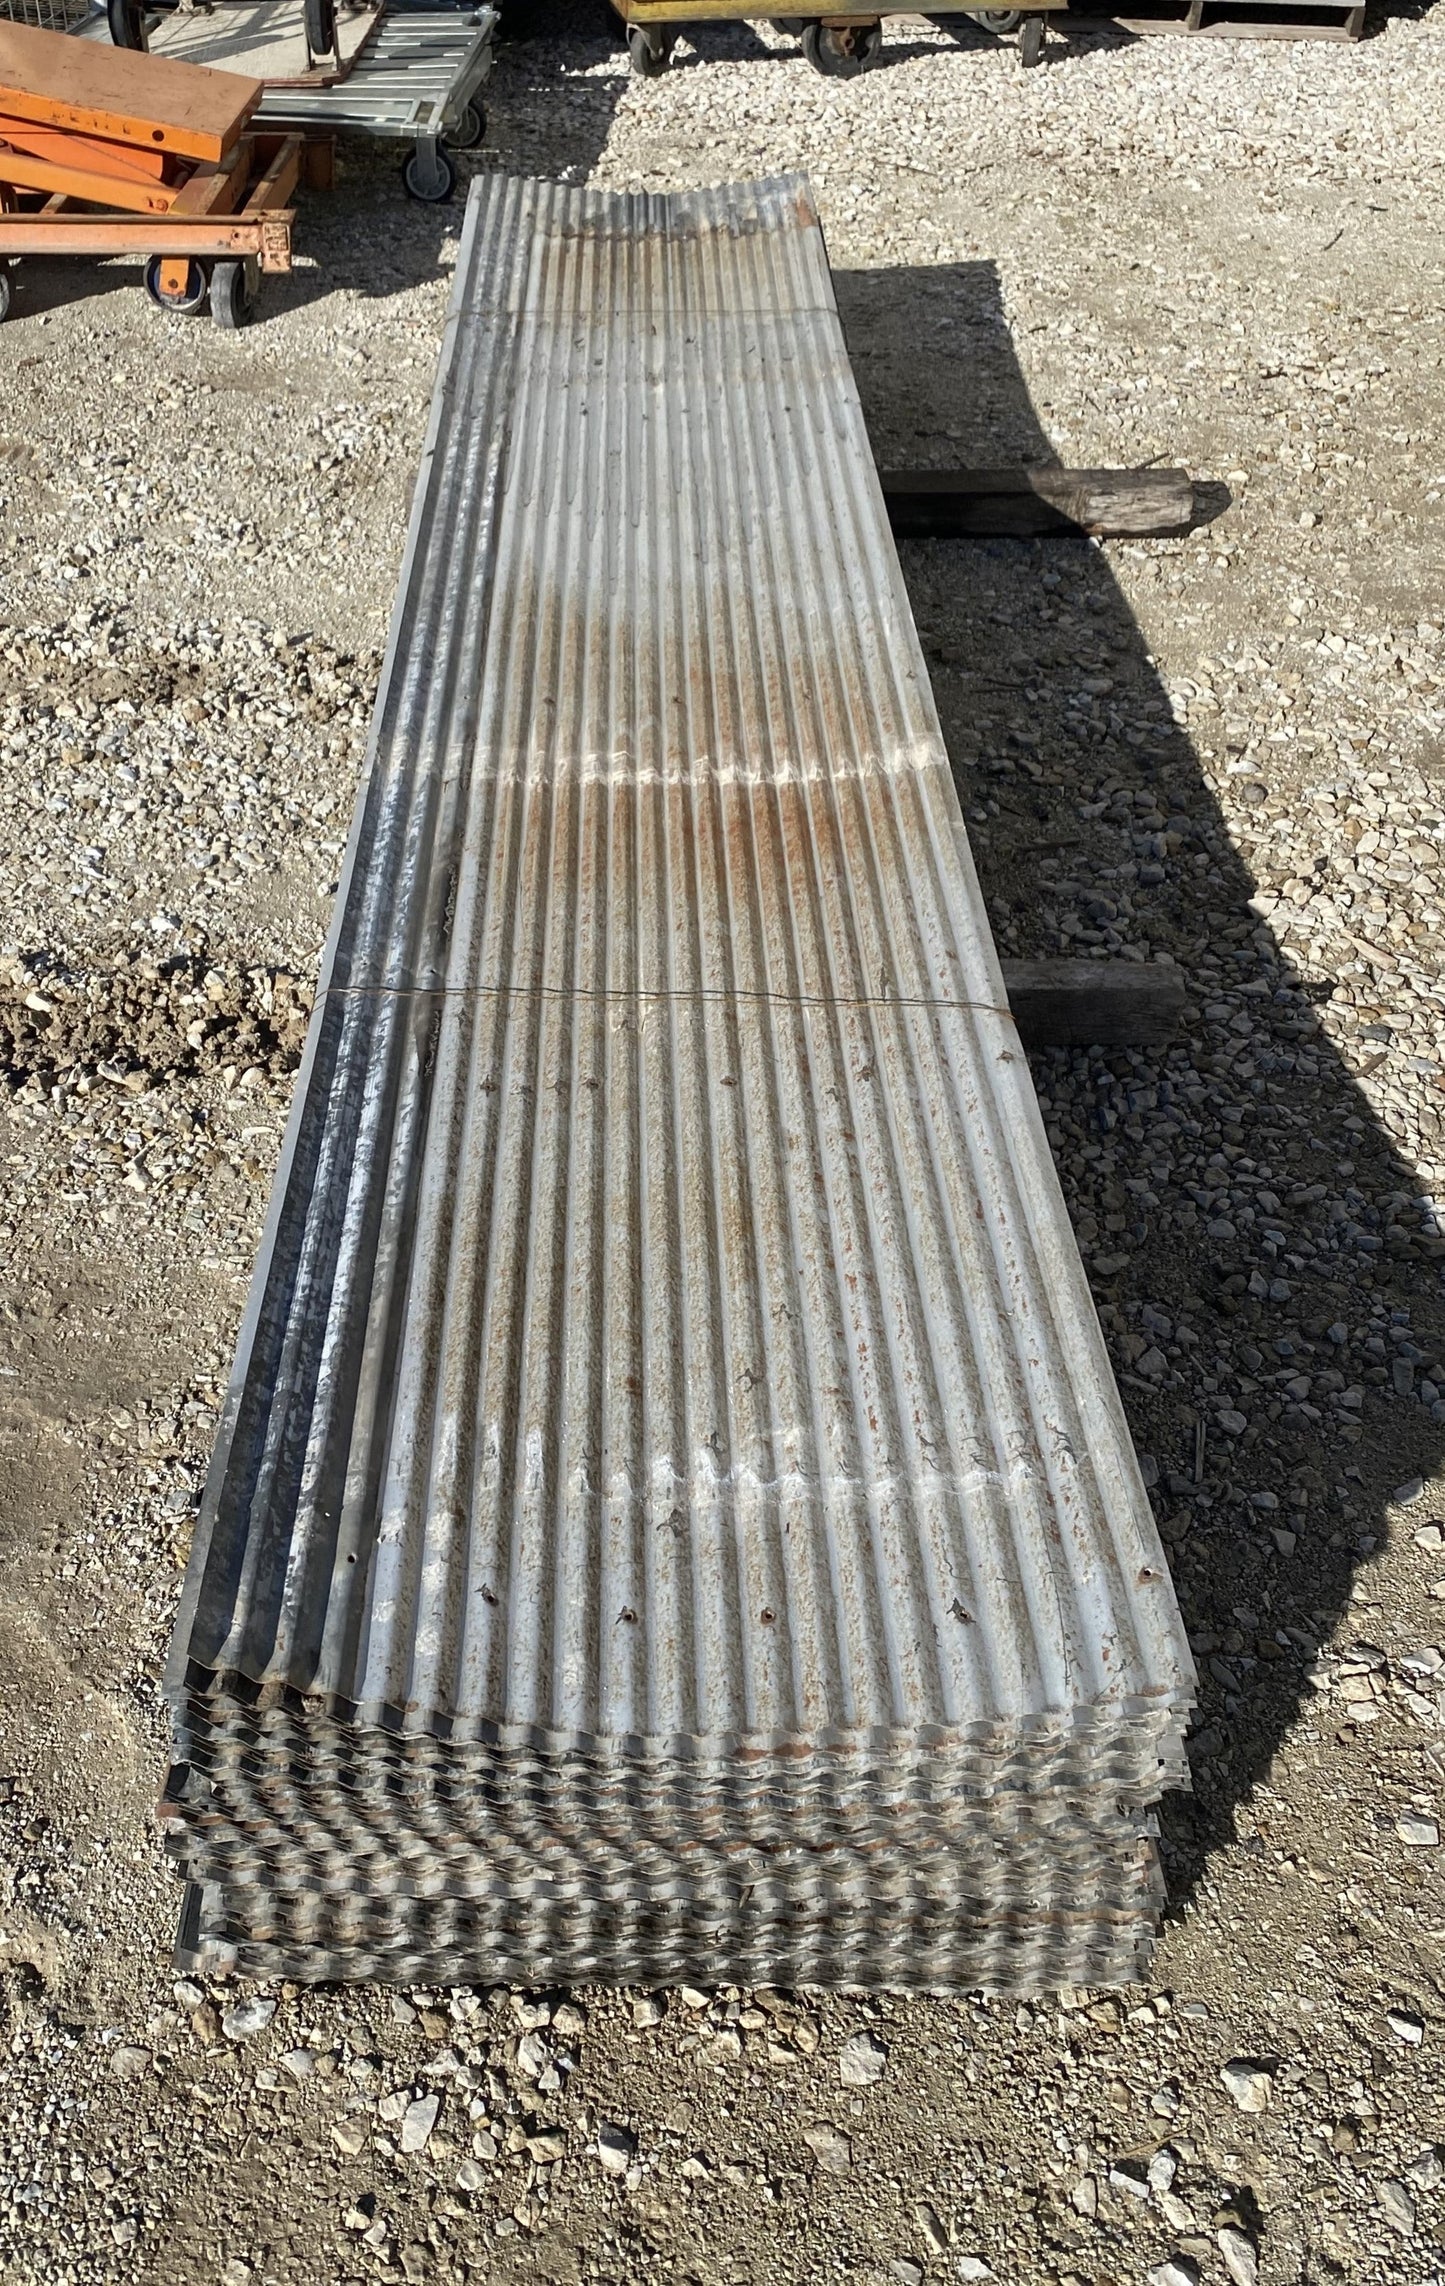 107 Sheets Barn Tin, Corrugated Metal Reclaimed Salvage, 12' Long 2568 sq ft A71